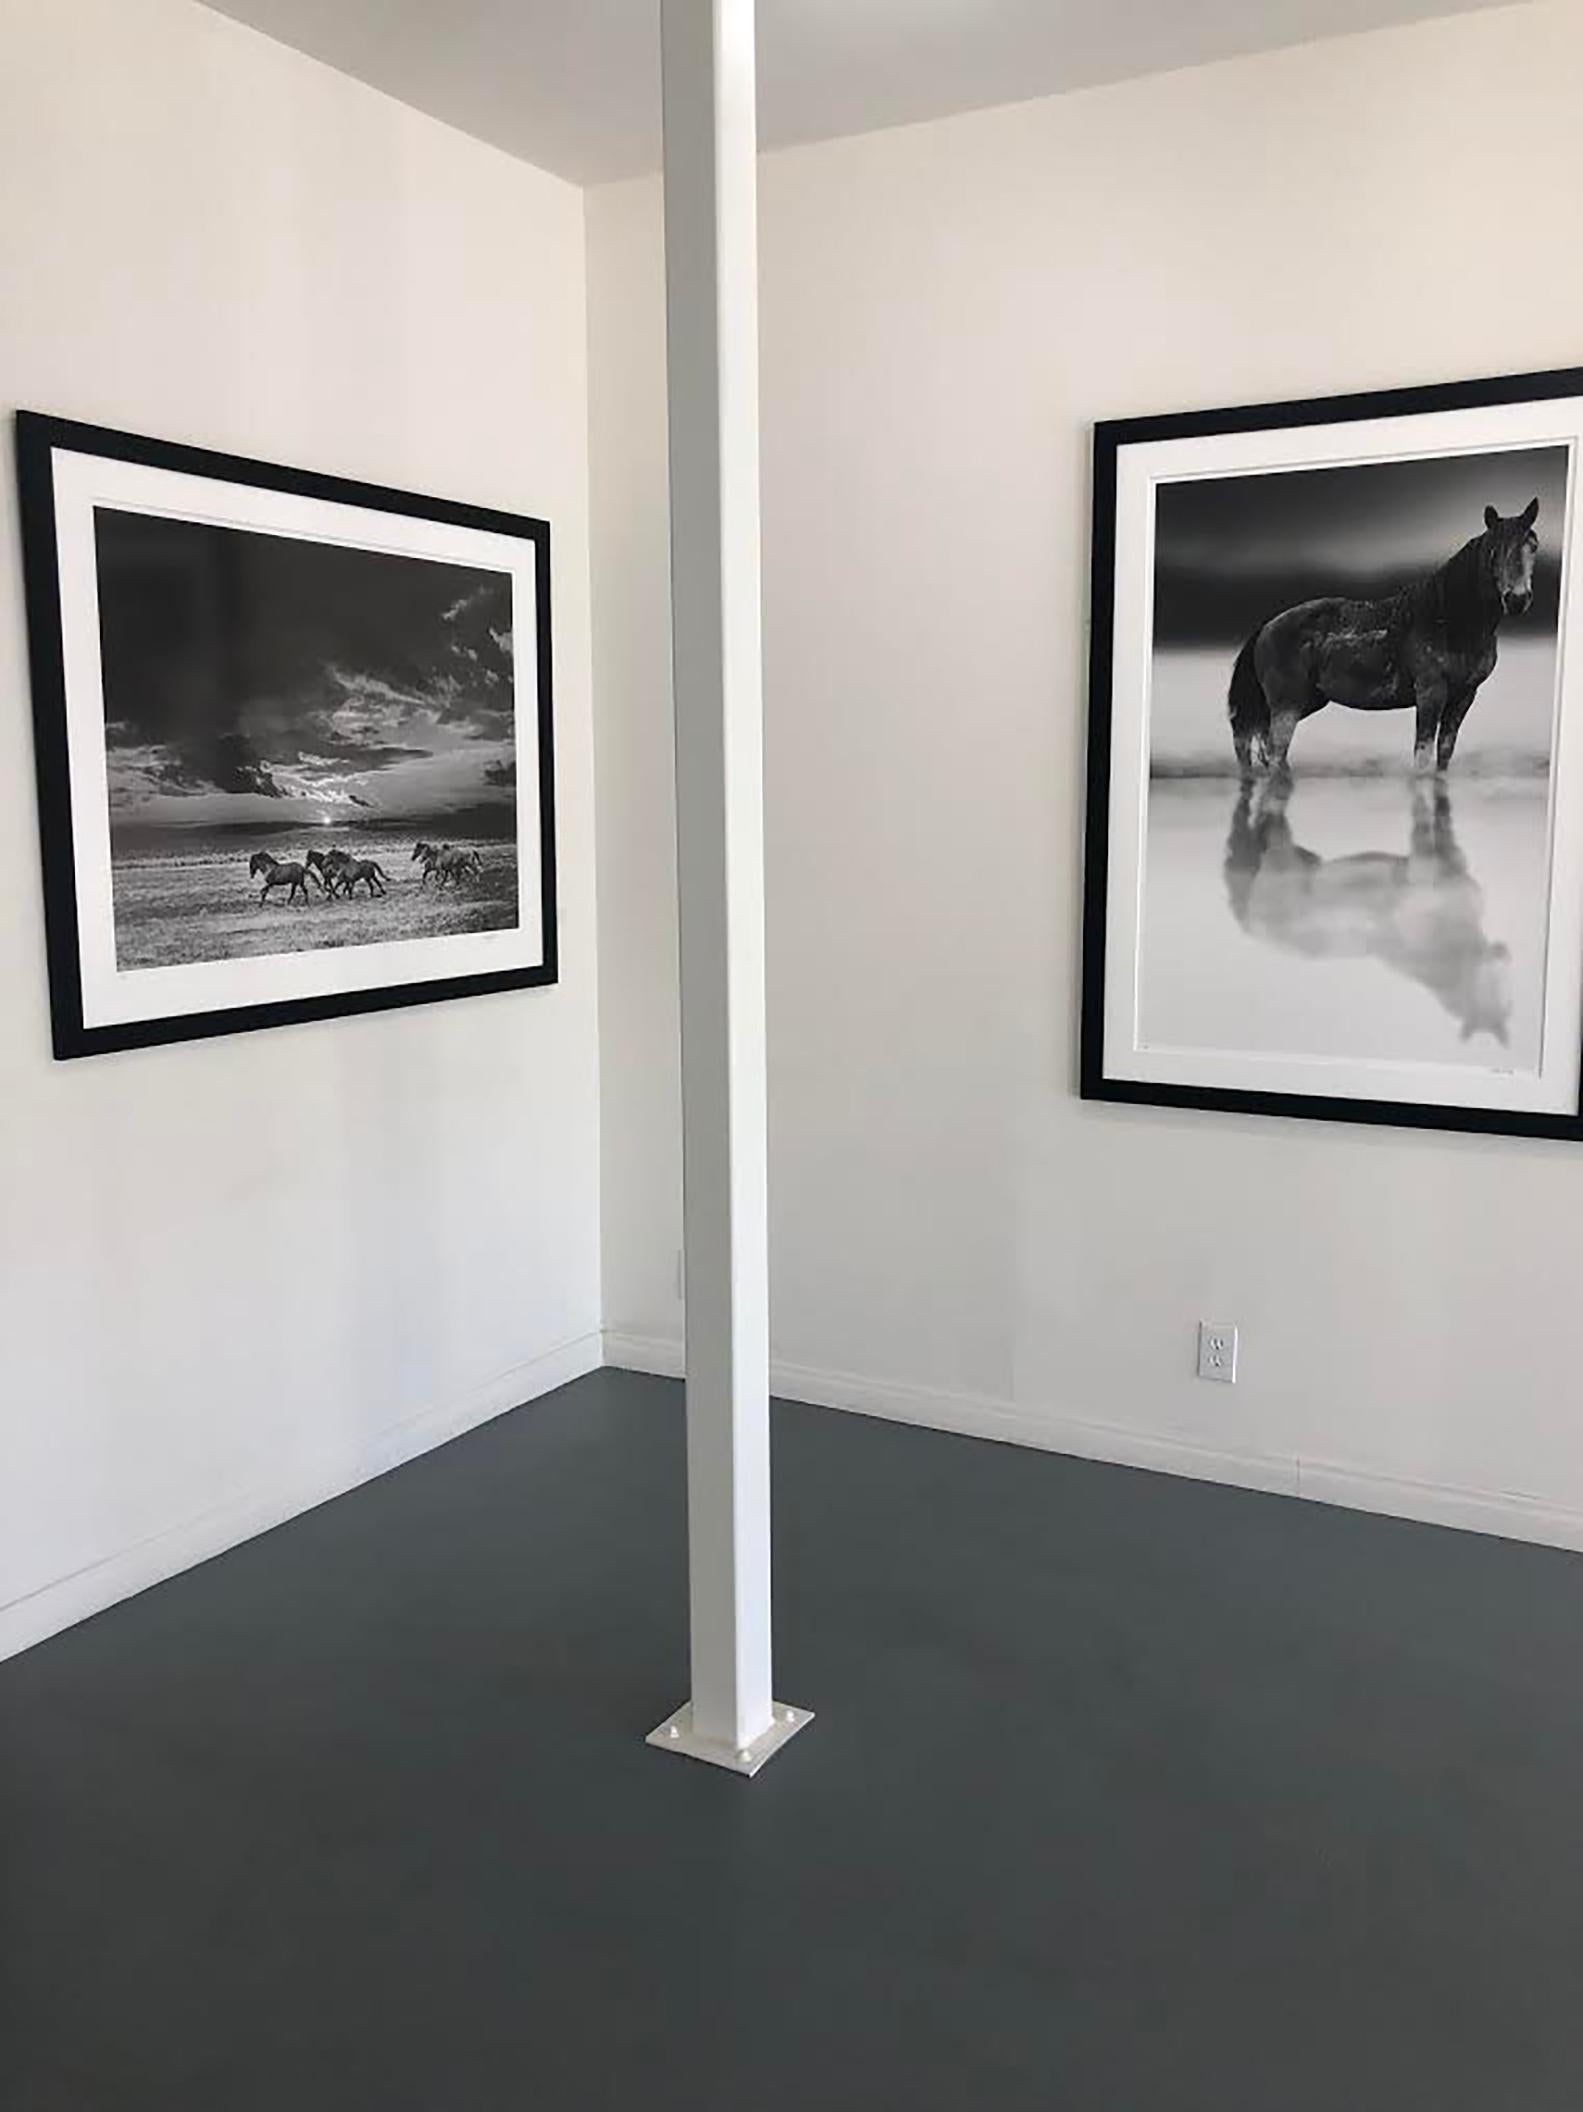 Chasing the Light 36x48 Mustangs Photography of Wild Horses Unsigned Western Art - Gray Black and White Photograph by Shane Russeck